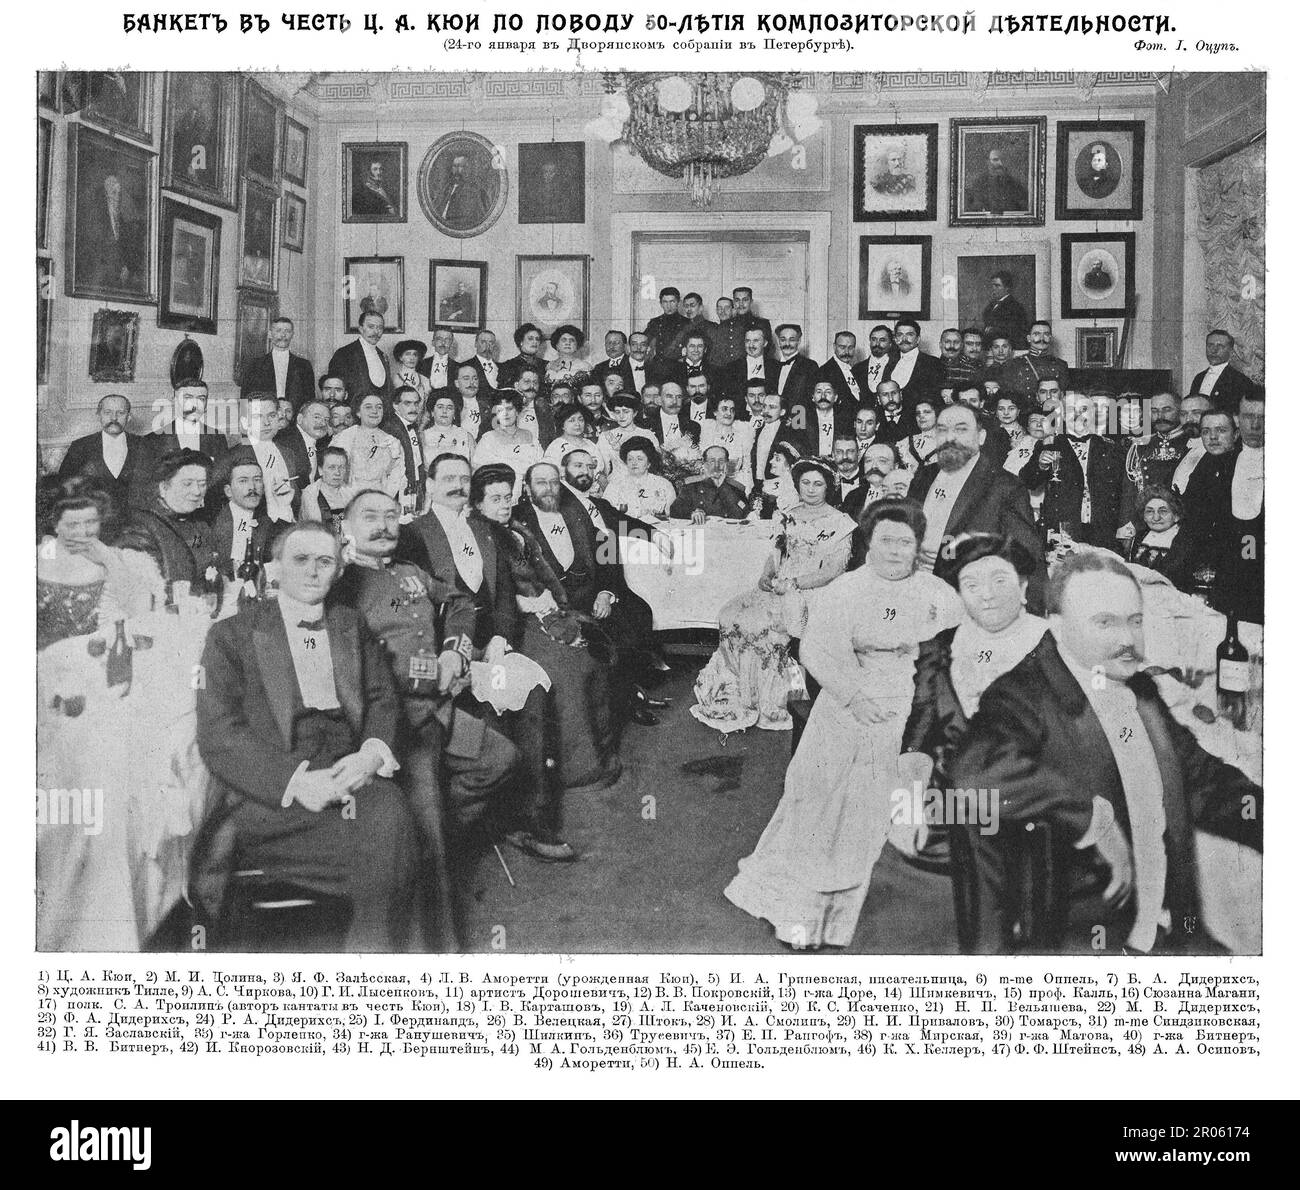 Banquet in honor of César Antonovich Cui on the occasion of the 50th anniversary of his composer activity. Photo from 1910. Stock Photo